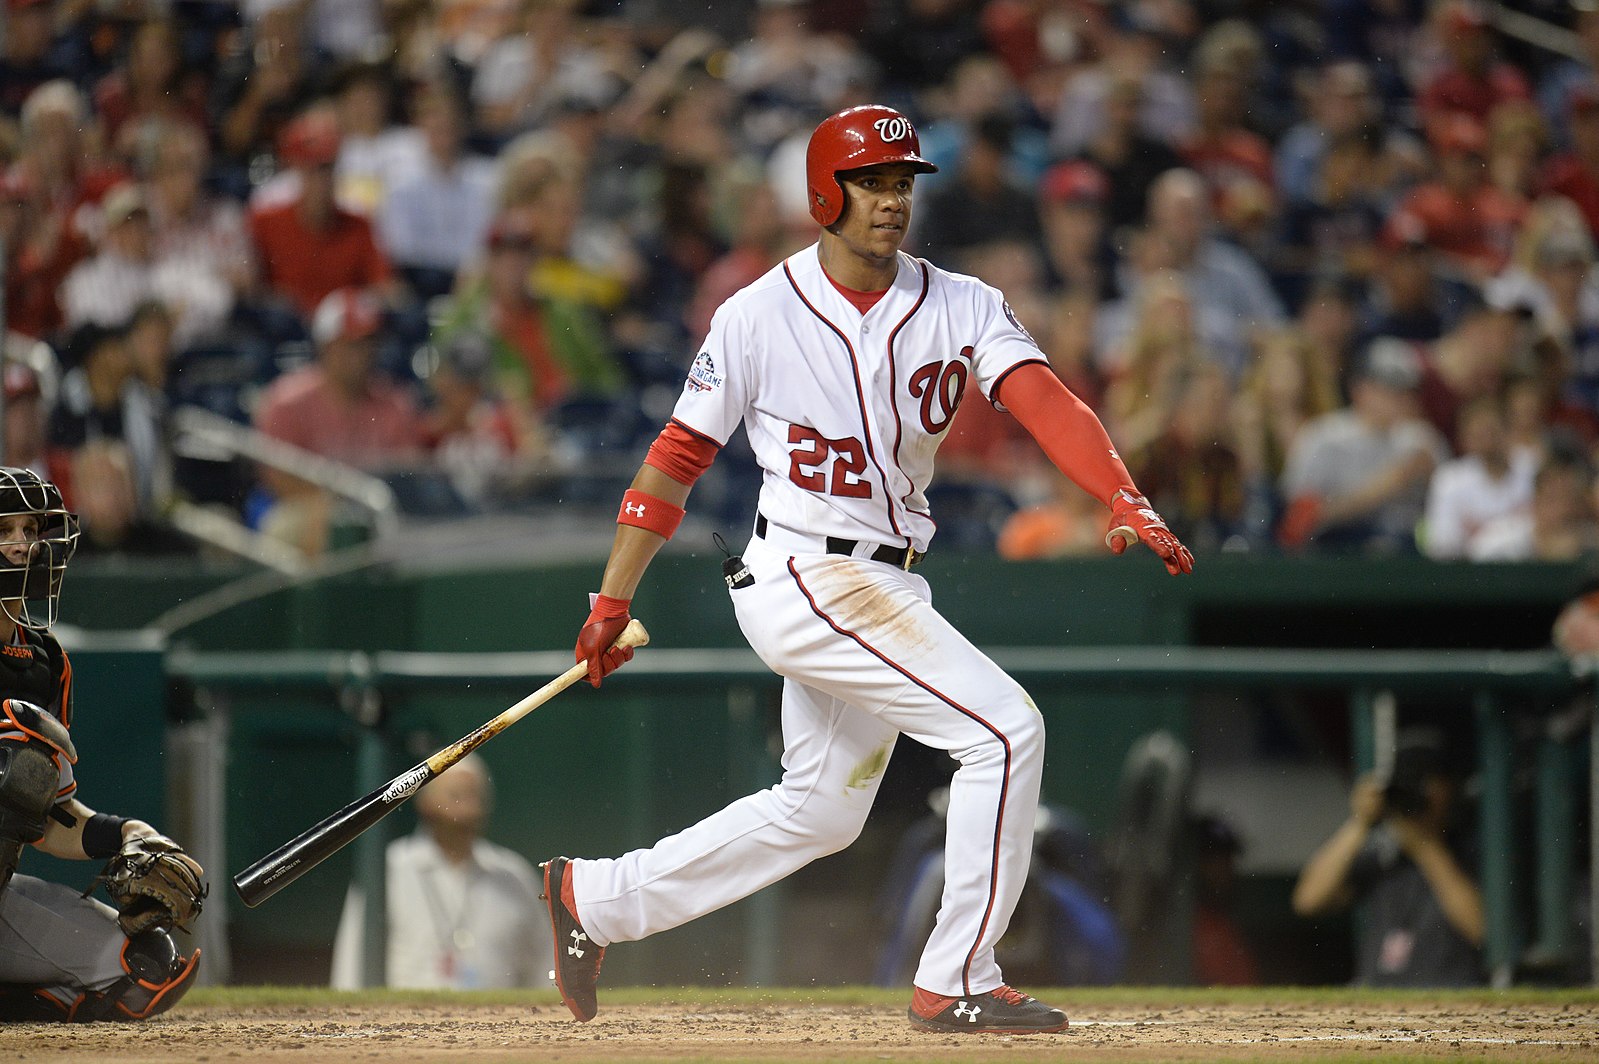 Photo of Juan Soto in red and white baseball jersey and helmet, in motion with a baseball bat in his right hand.